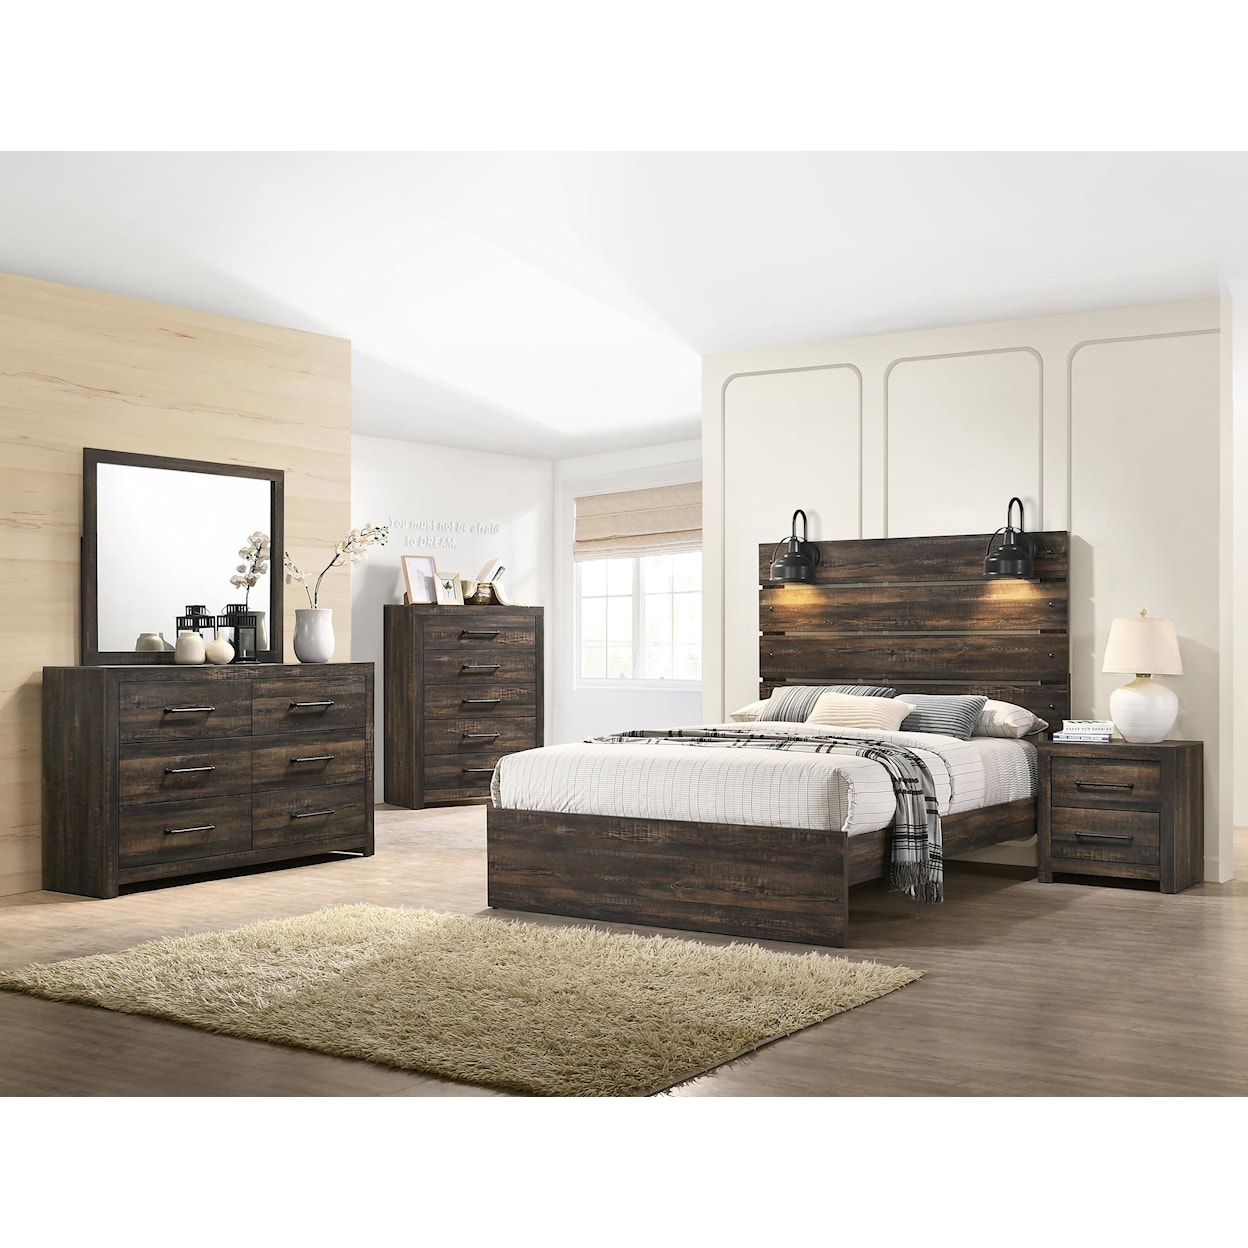 Lifestyle 0399 5 Piece Queen Bedroom Set with Chest